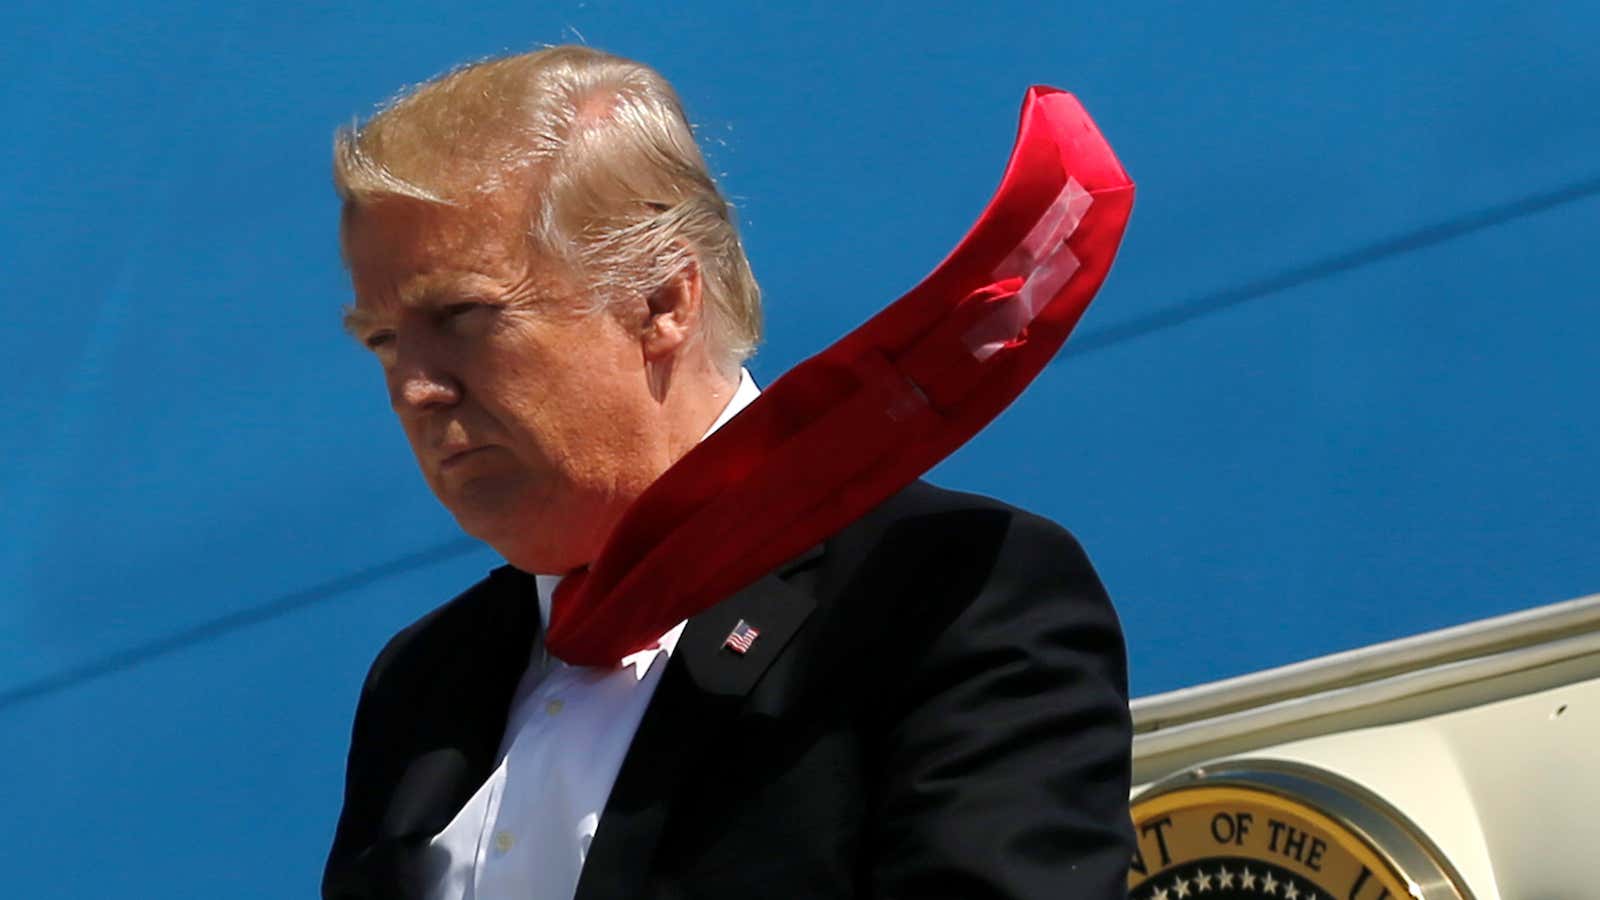 If the tie fits.